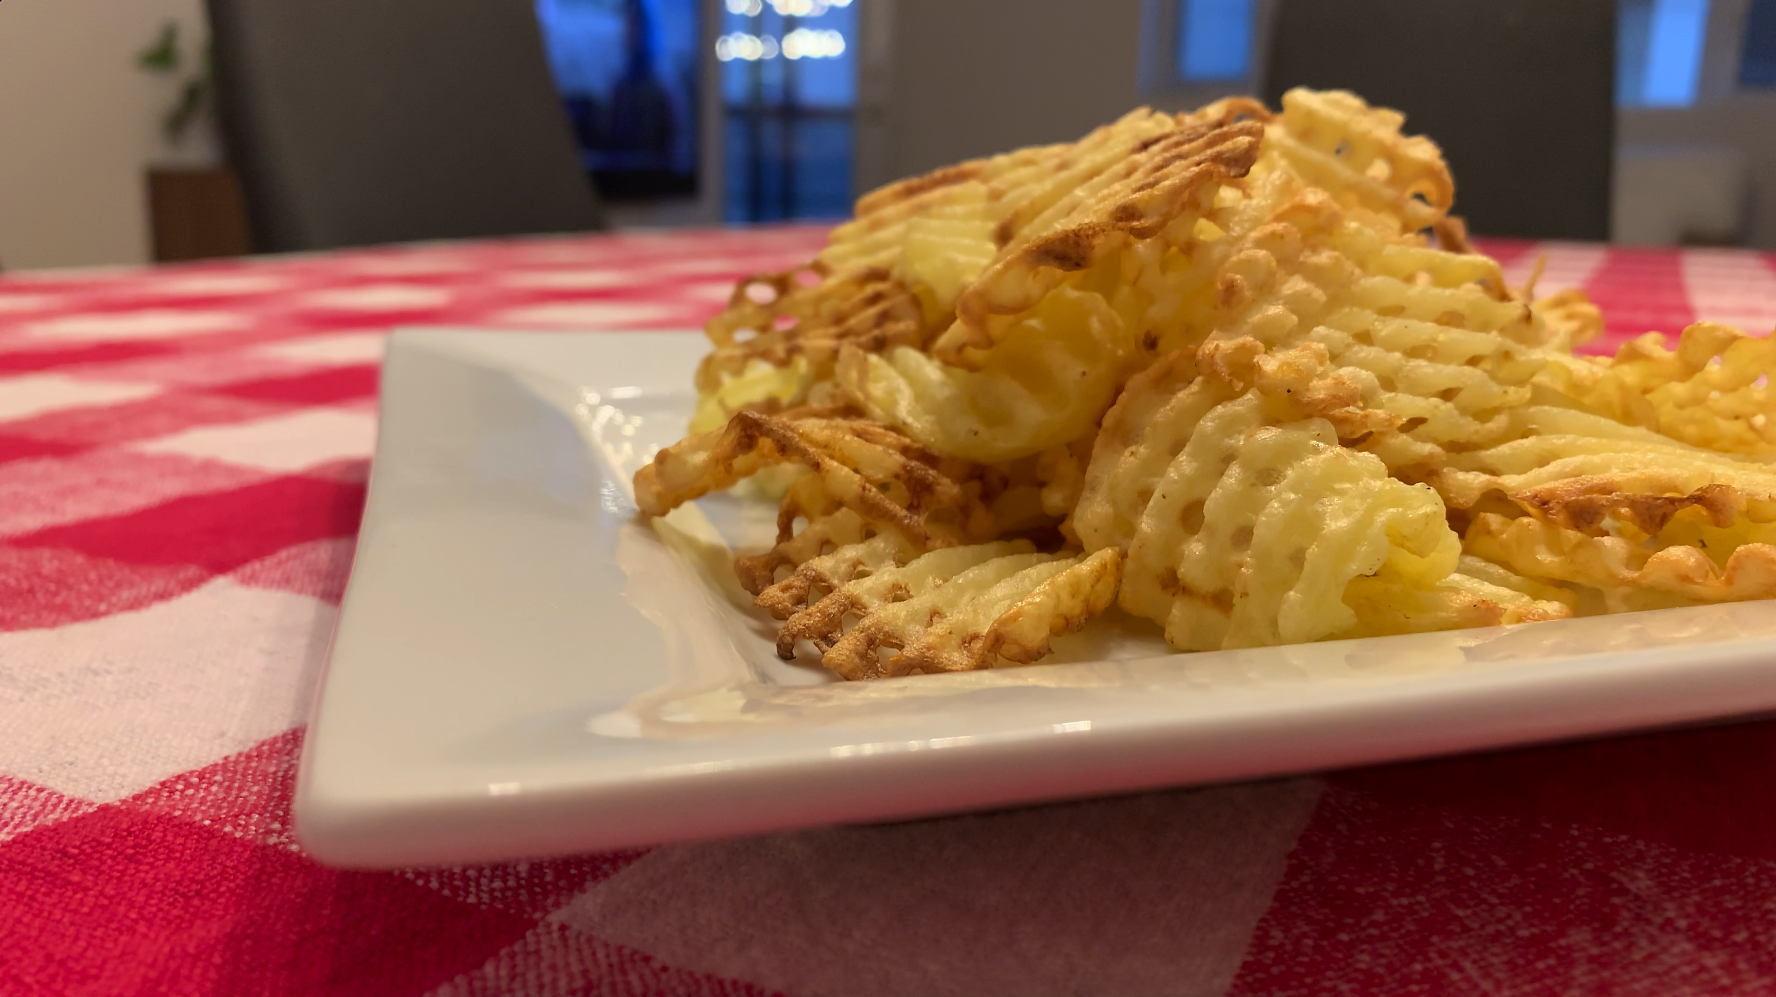 Waffle Fries : 5 Steps (with Pictures) - Instructables